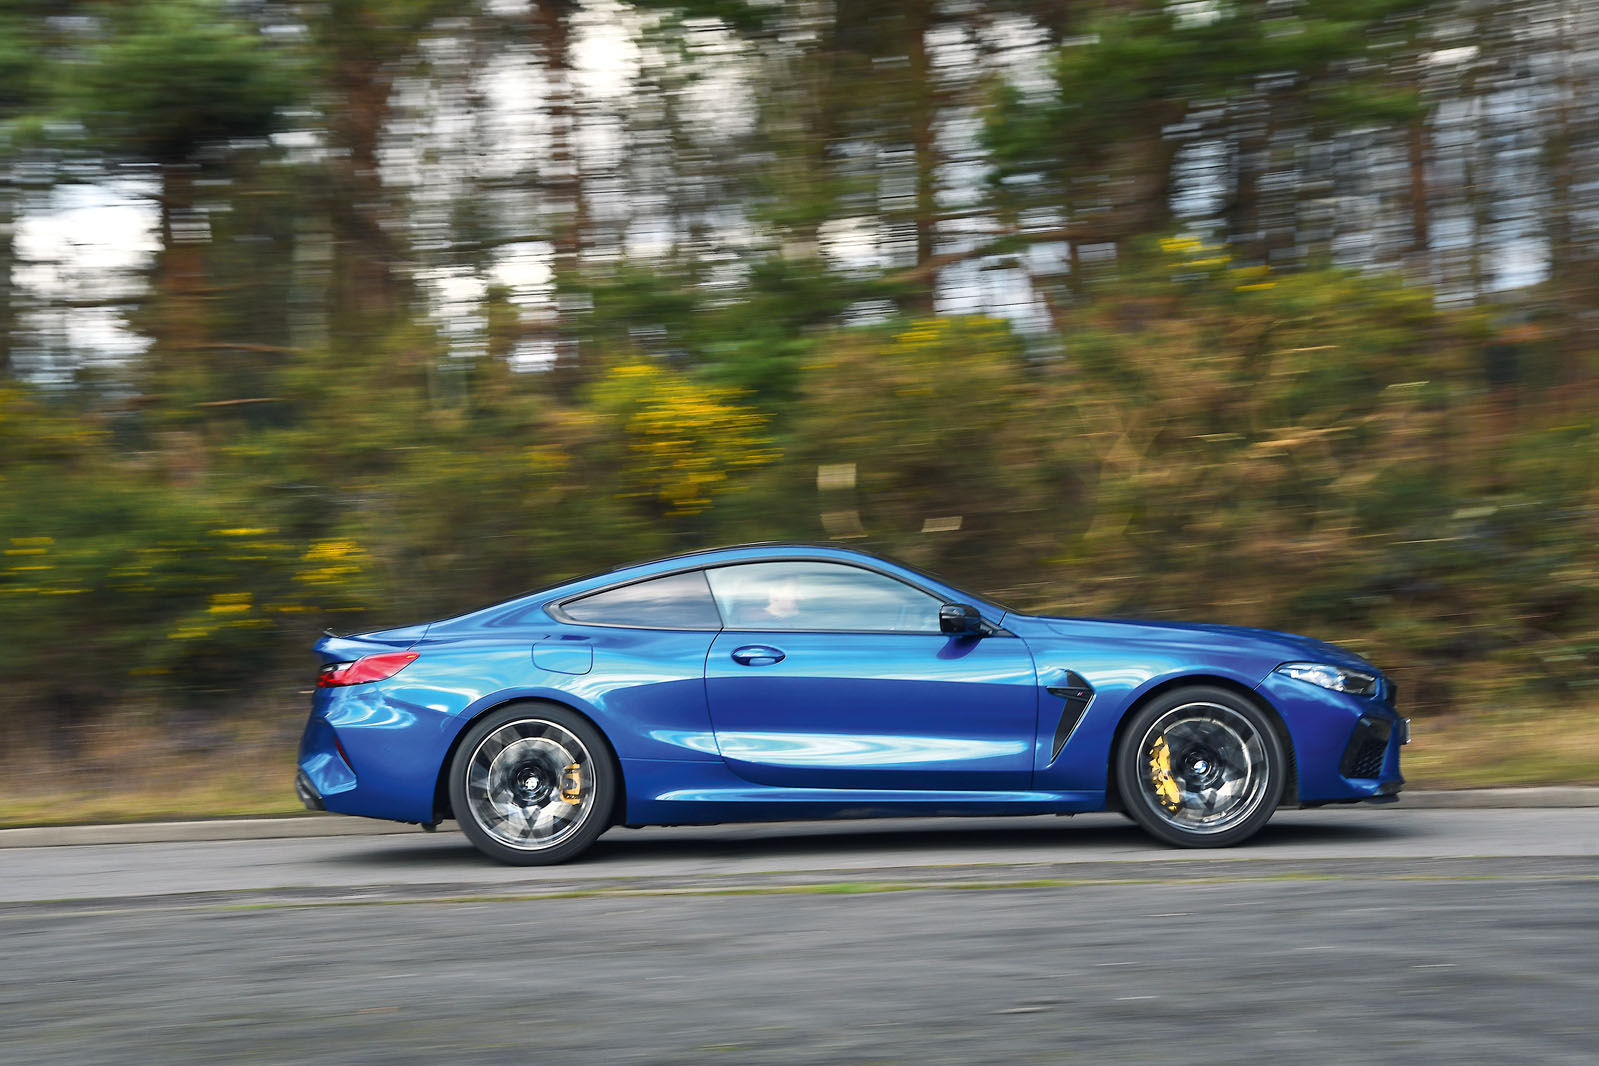 BMW M8 Competition coupe 2020 road test review - hero side